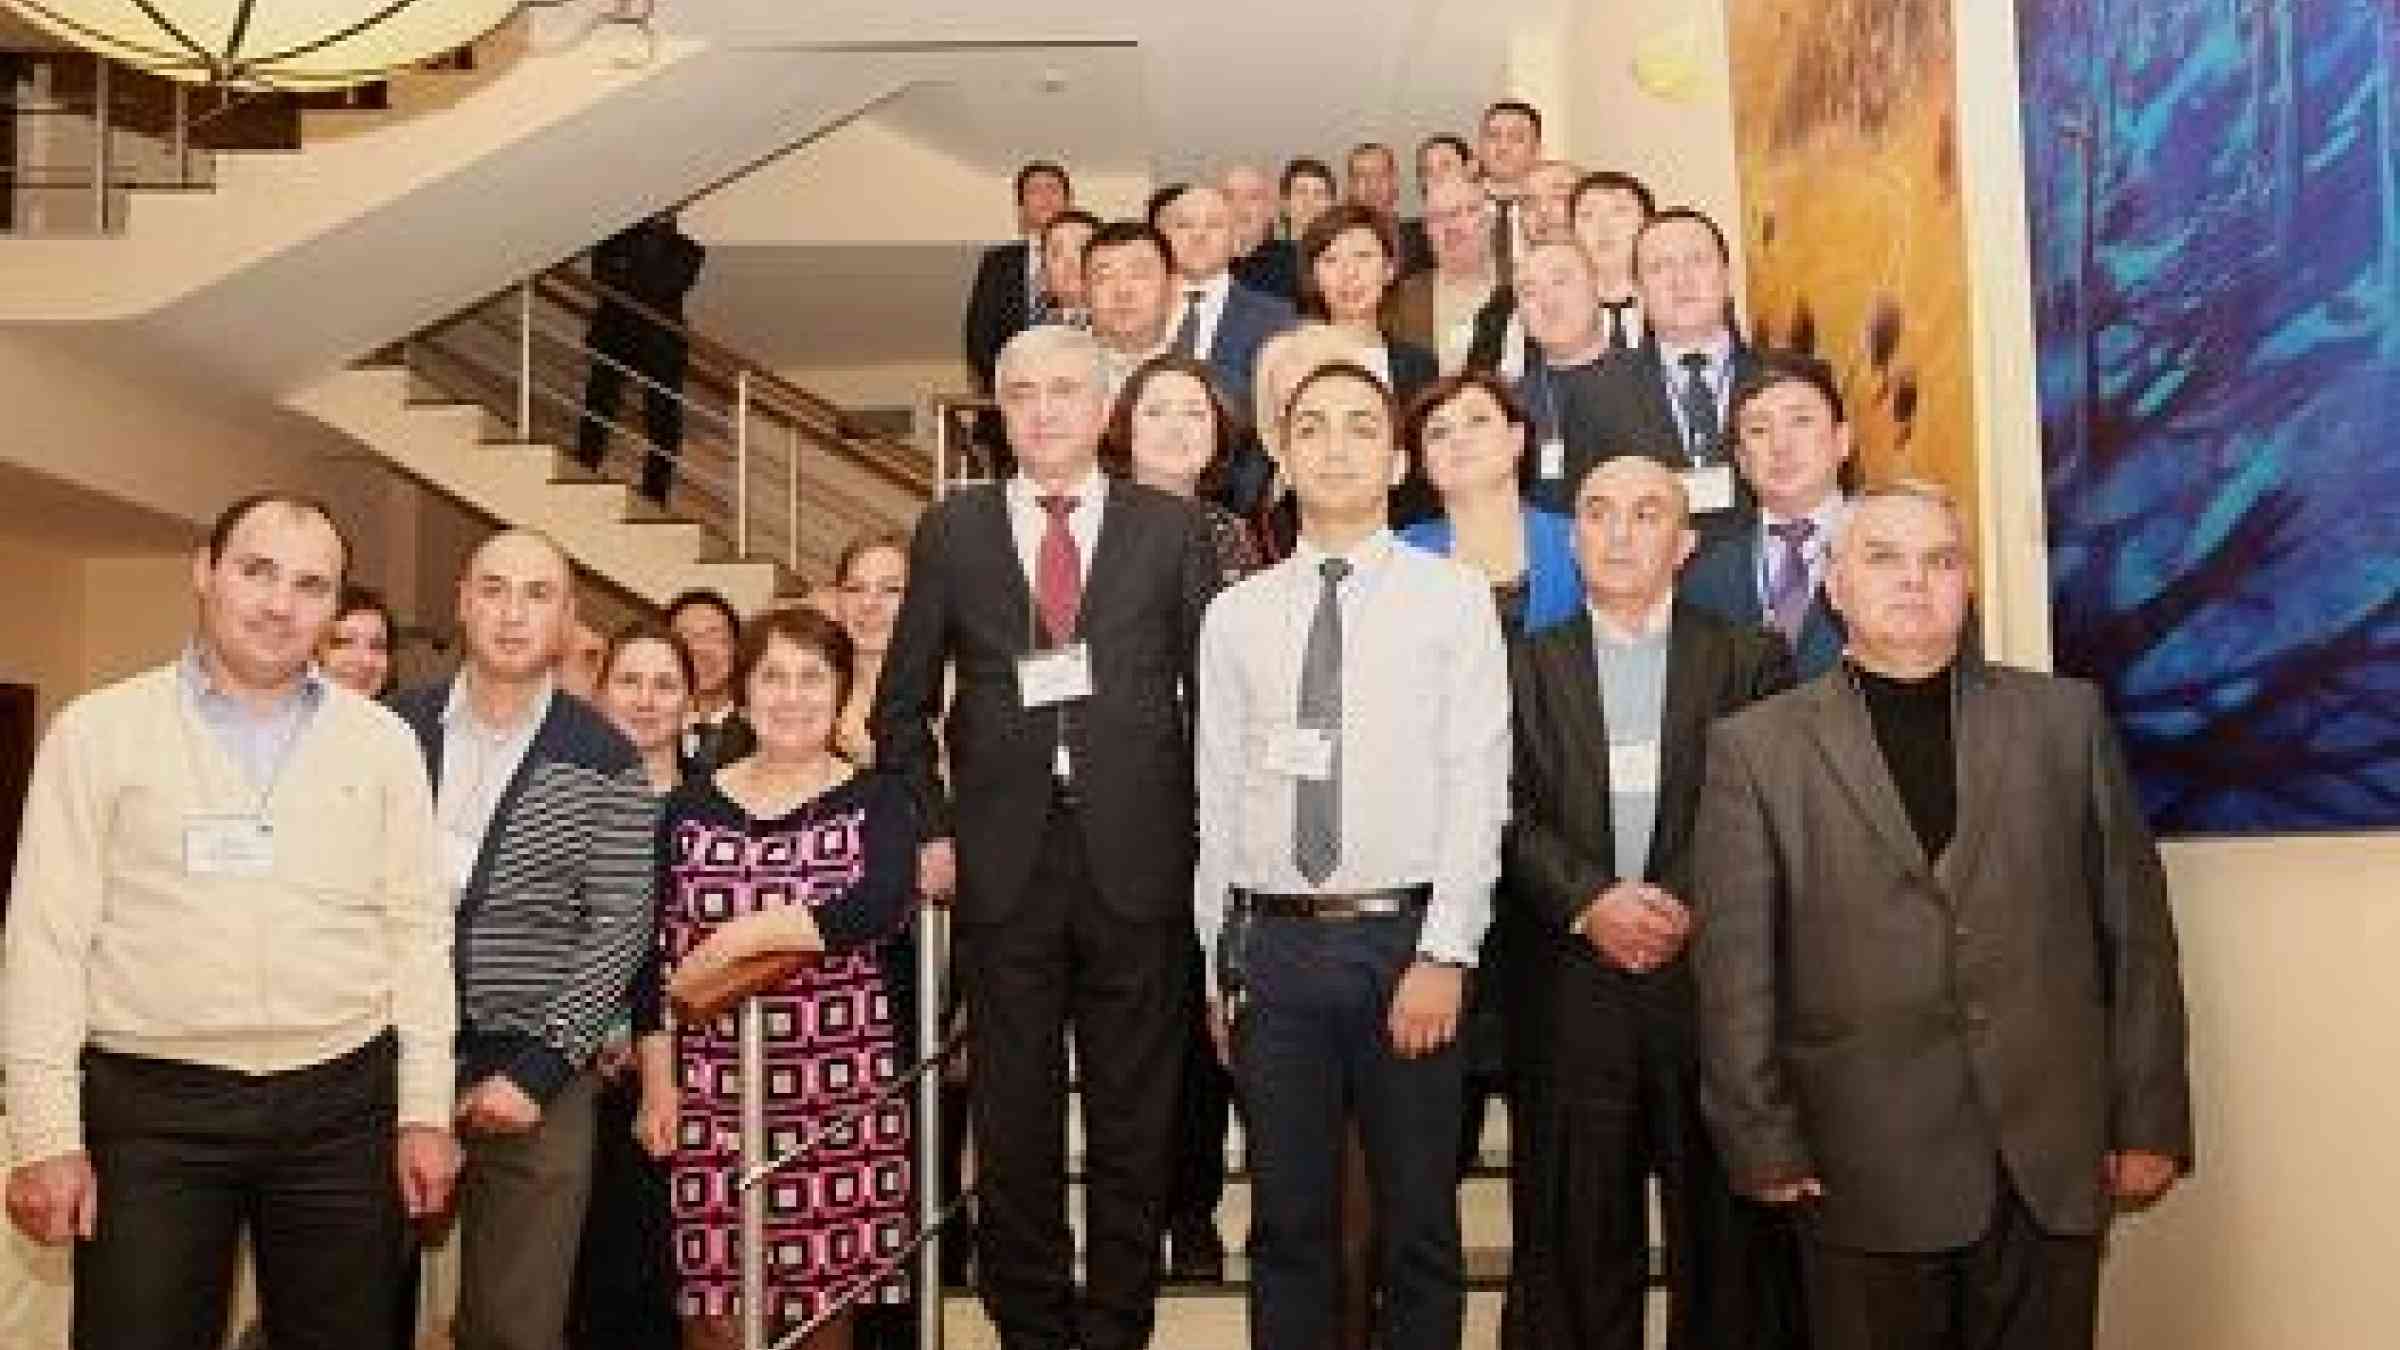 Participants at the regional workshop have gathered to chart the course for greater urban resilience in Central Asia and the South Caucasus (Photo: UNISDR)